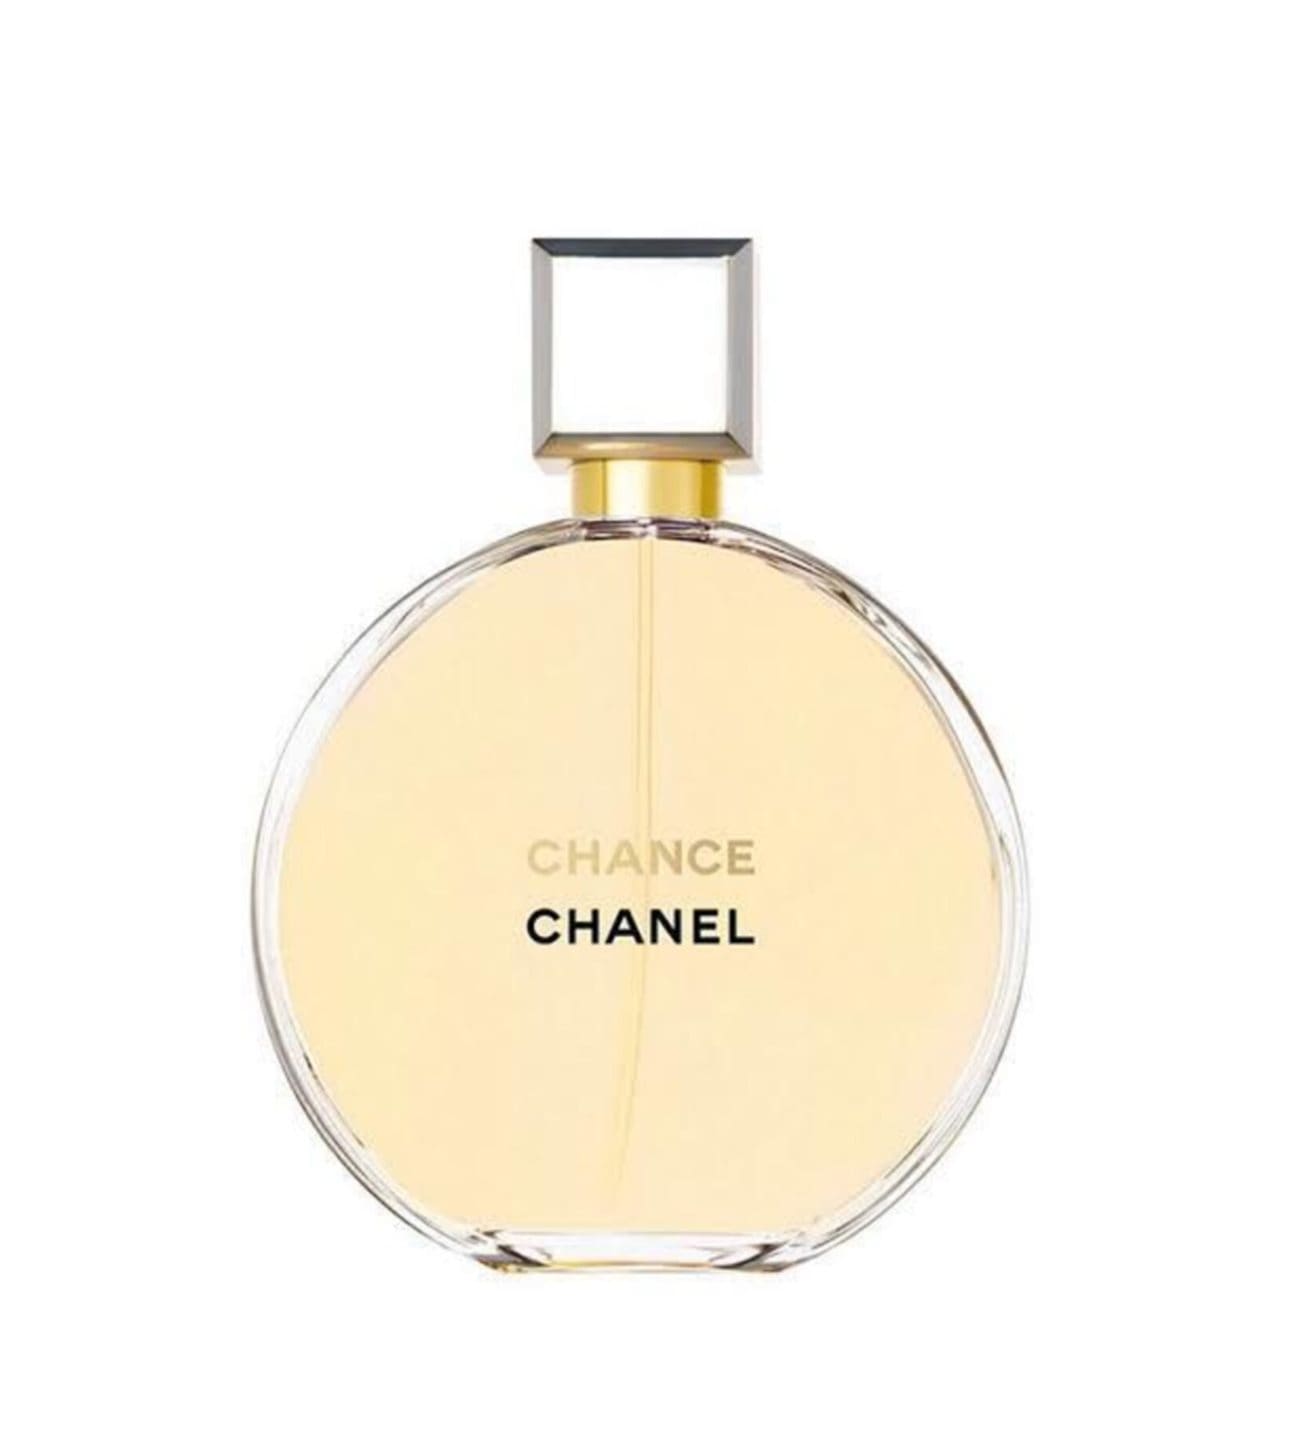 Chanel Chance Edp Perfume For Women 100Ml – The Beauty 24